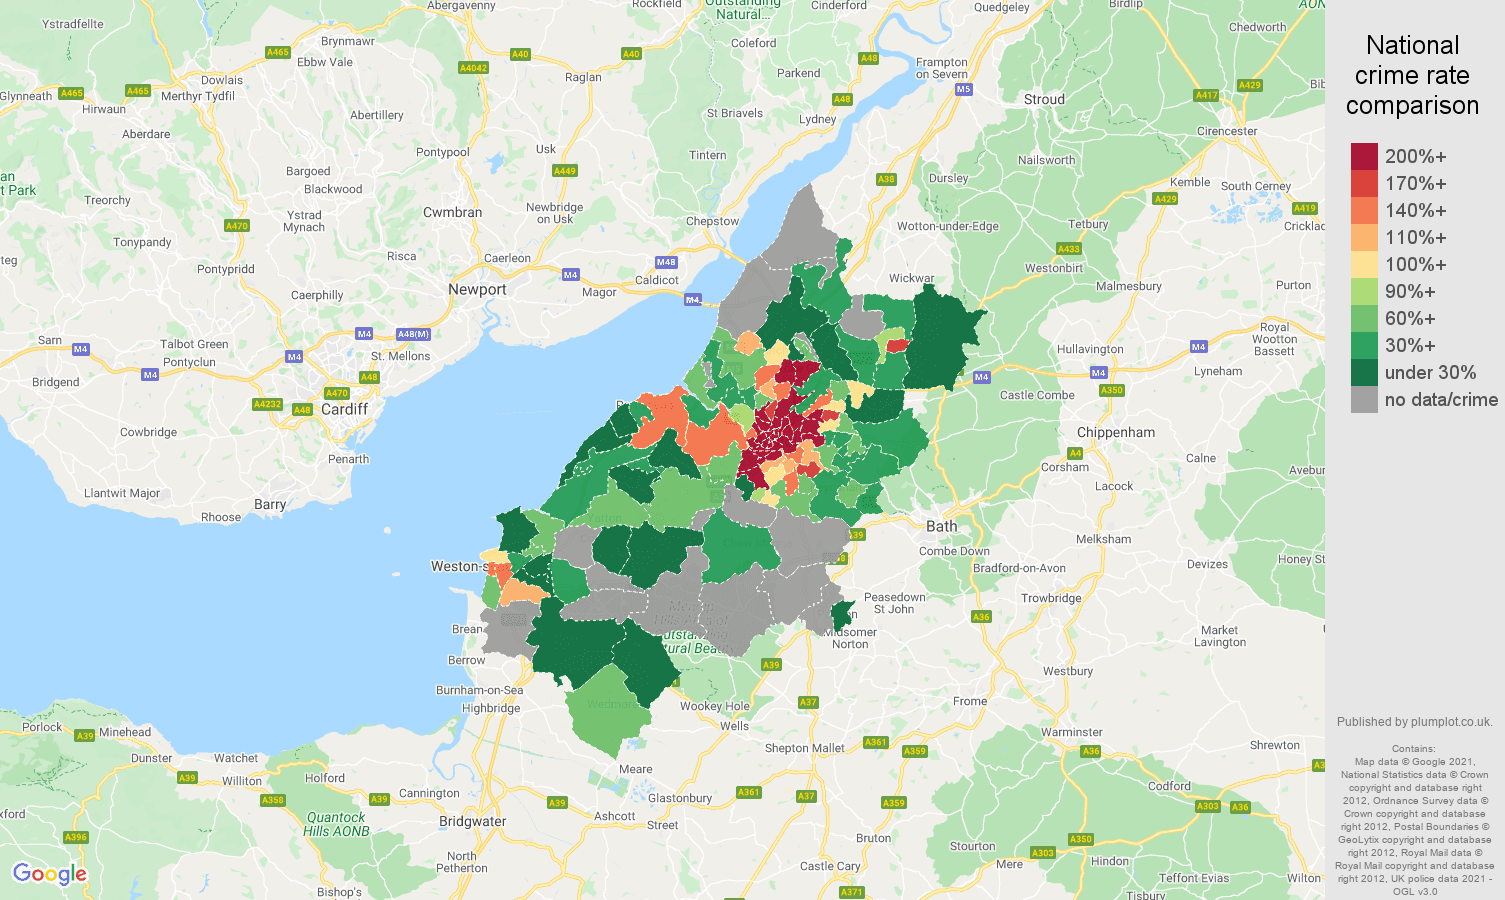 Bristol bicycle theft crime rate comparison map